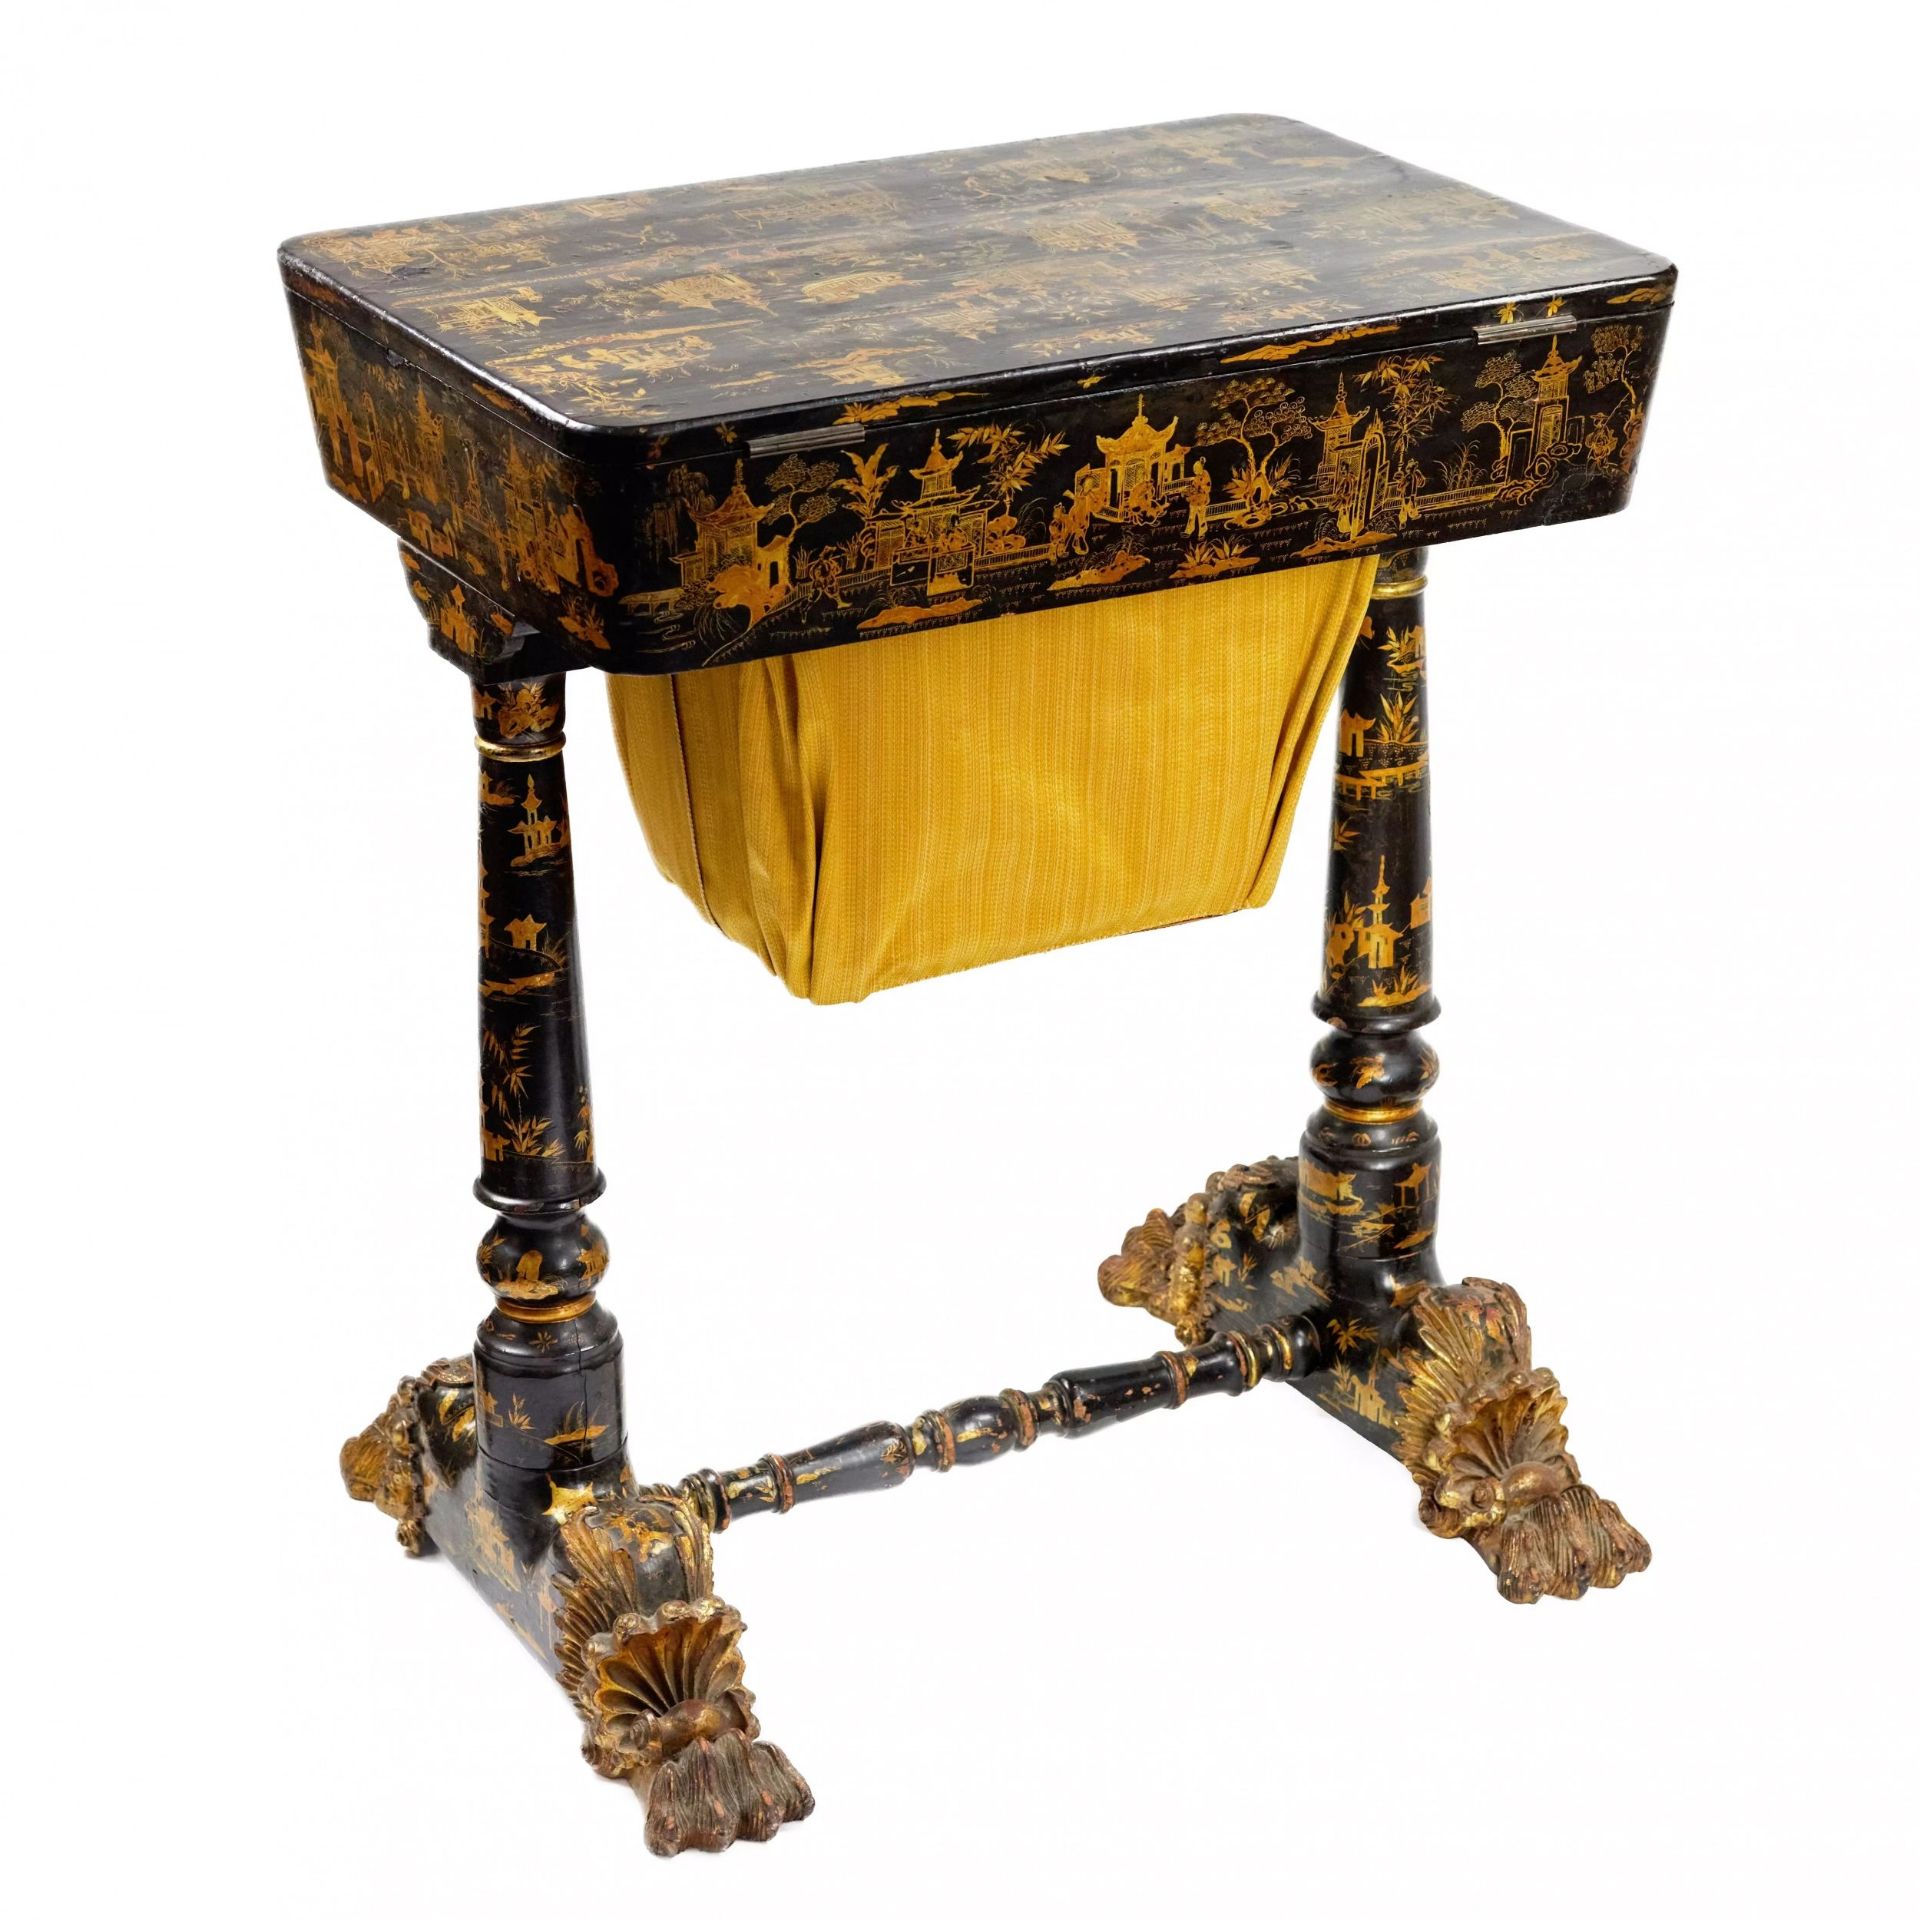 Needlework table made of black and gold Beijing lacquer. 19th century. - Bild 3 aus 11